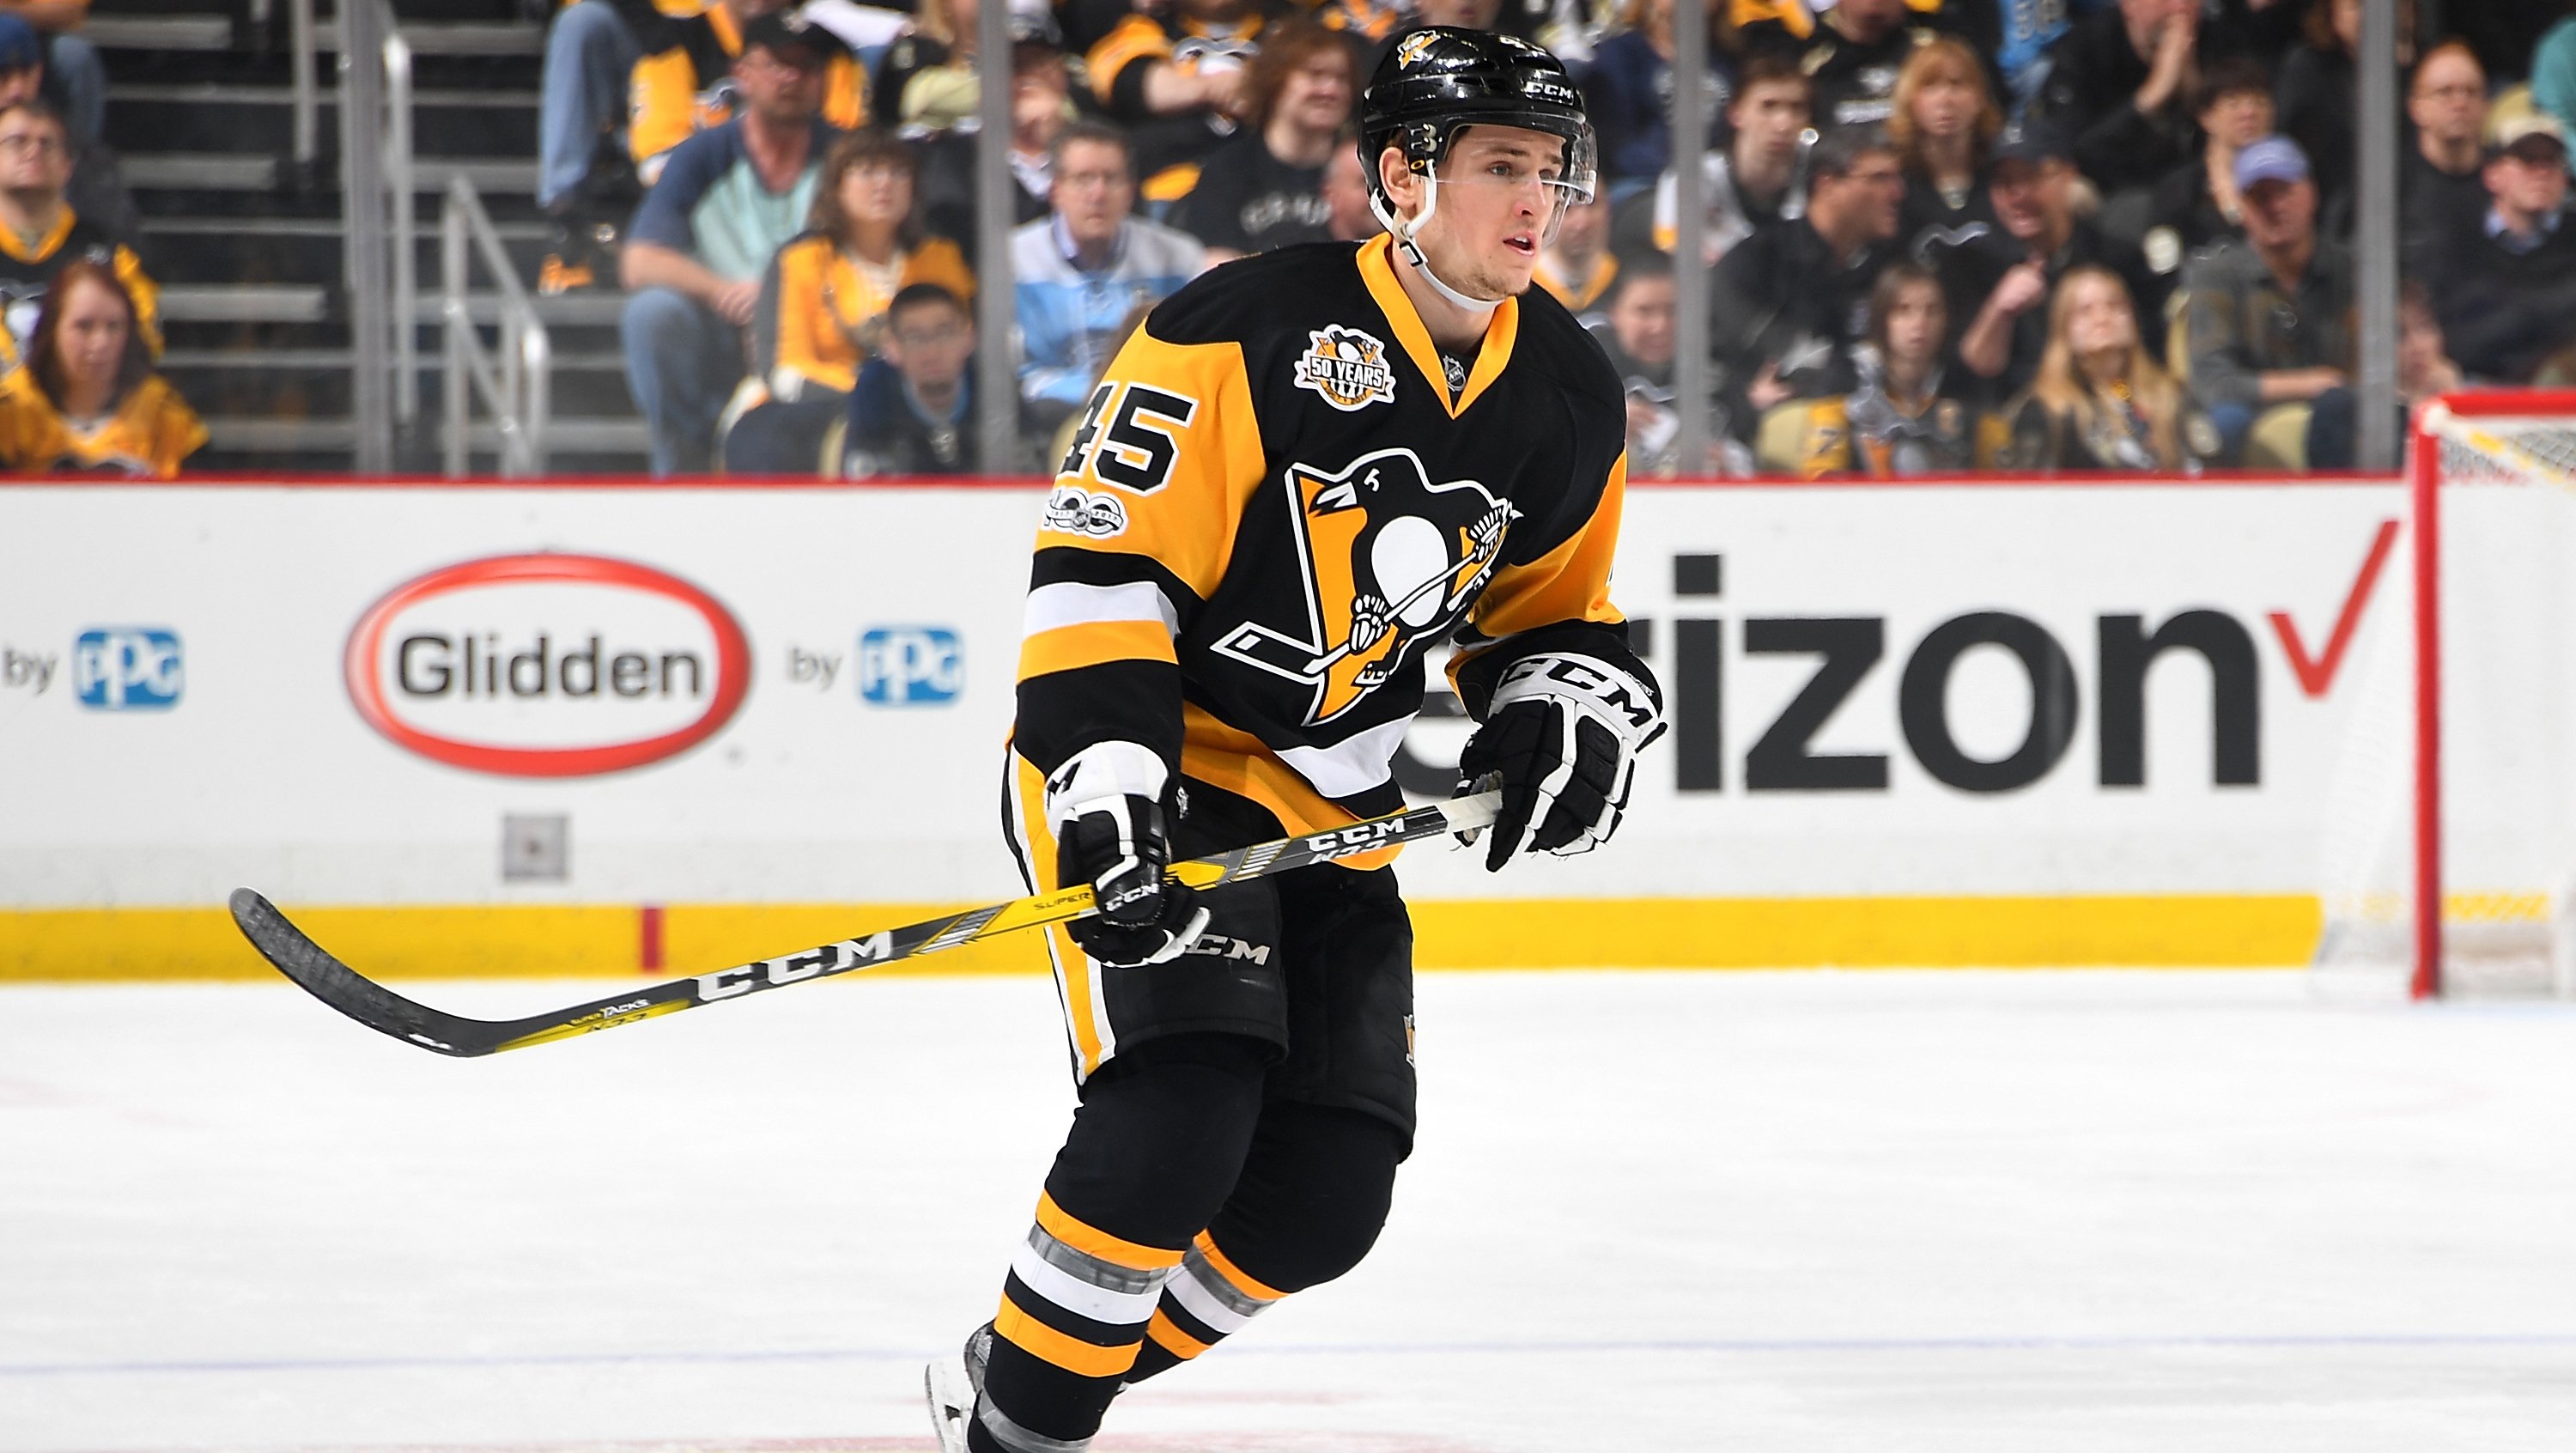 The #Pens have recalled forward Josh Archibald from the @WBSPenguins.